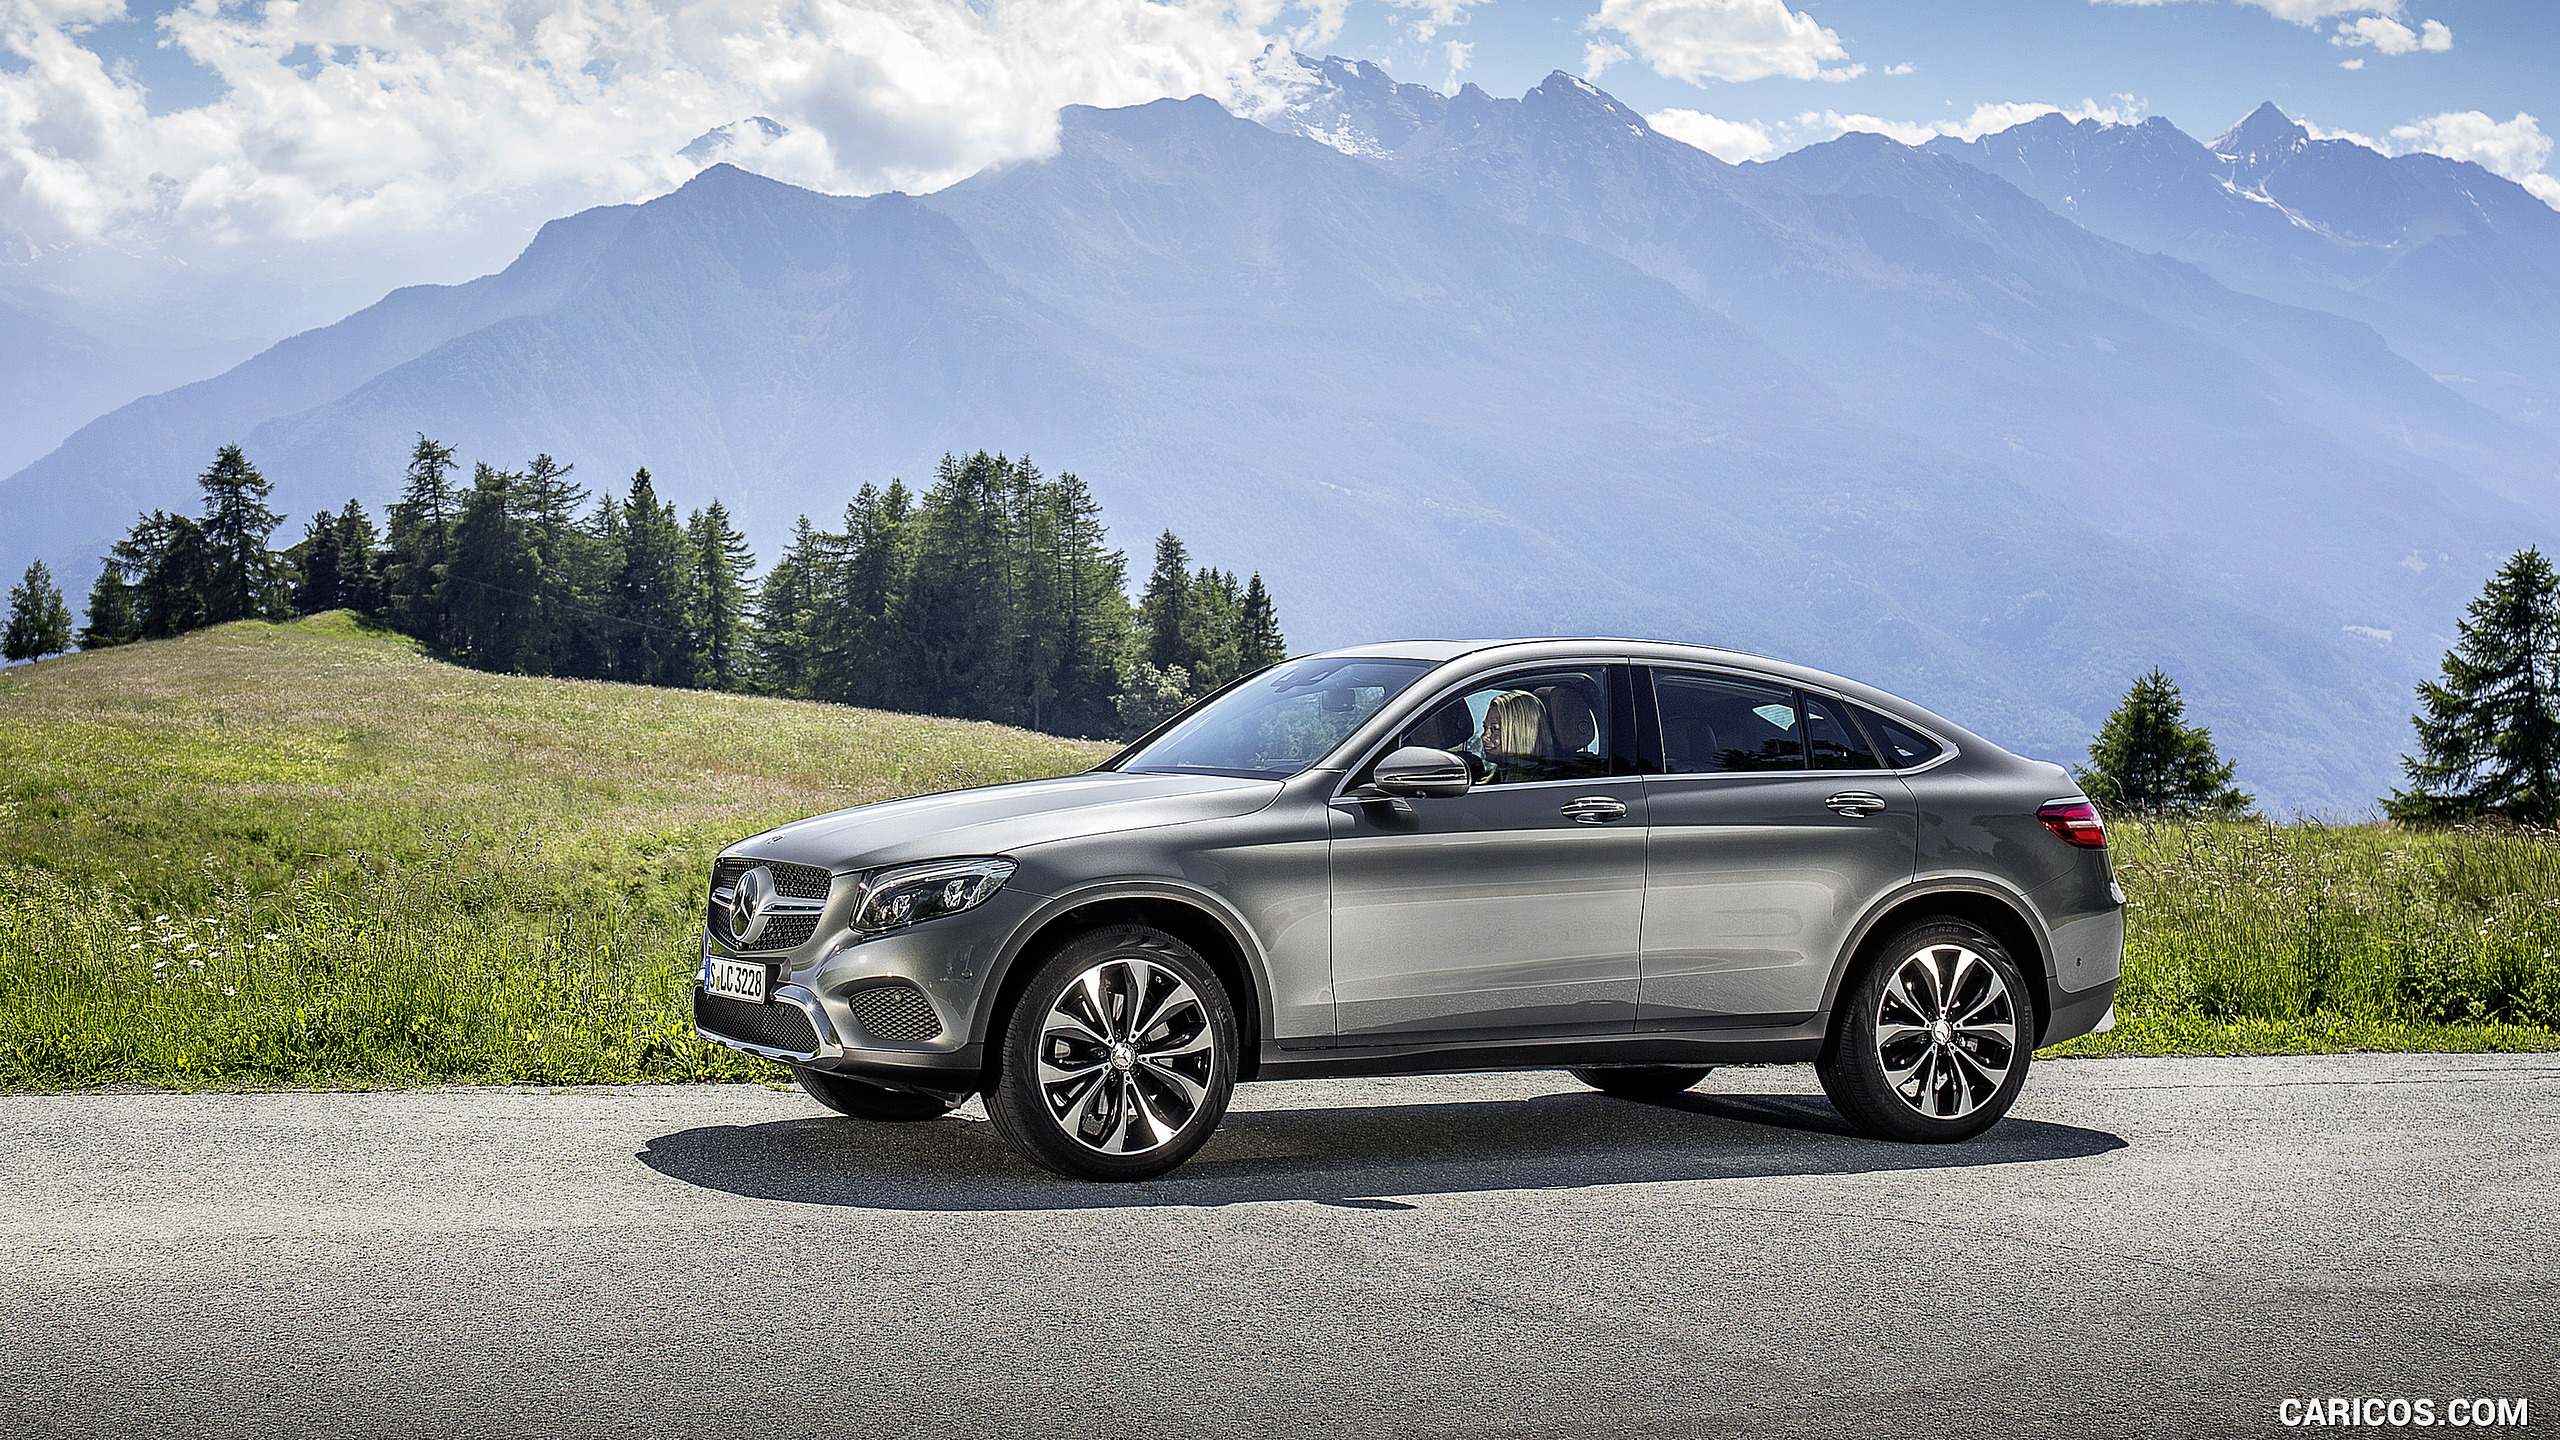 2017 Mercedes-Benz GLC 250 d 4MATIC Coupe (Diesel; Color: Selenite Grey) - Side, #108 of 144